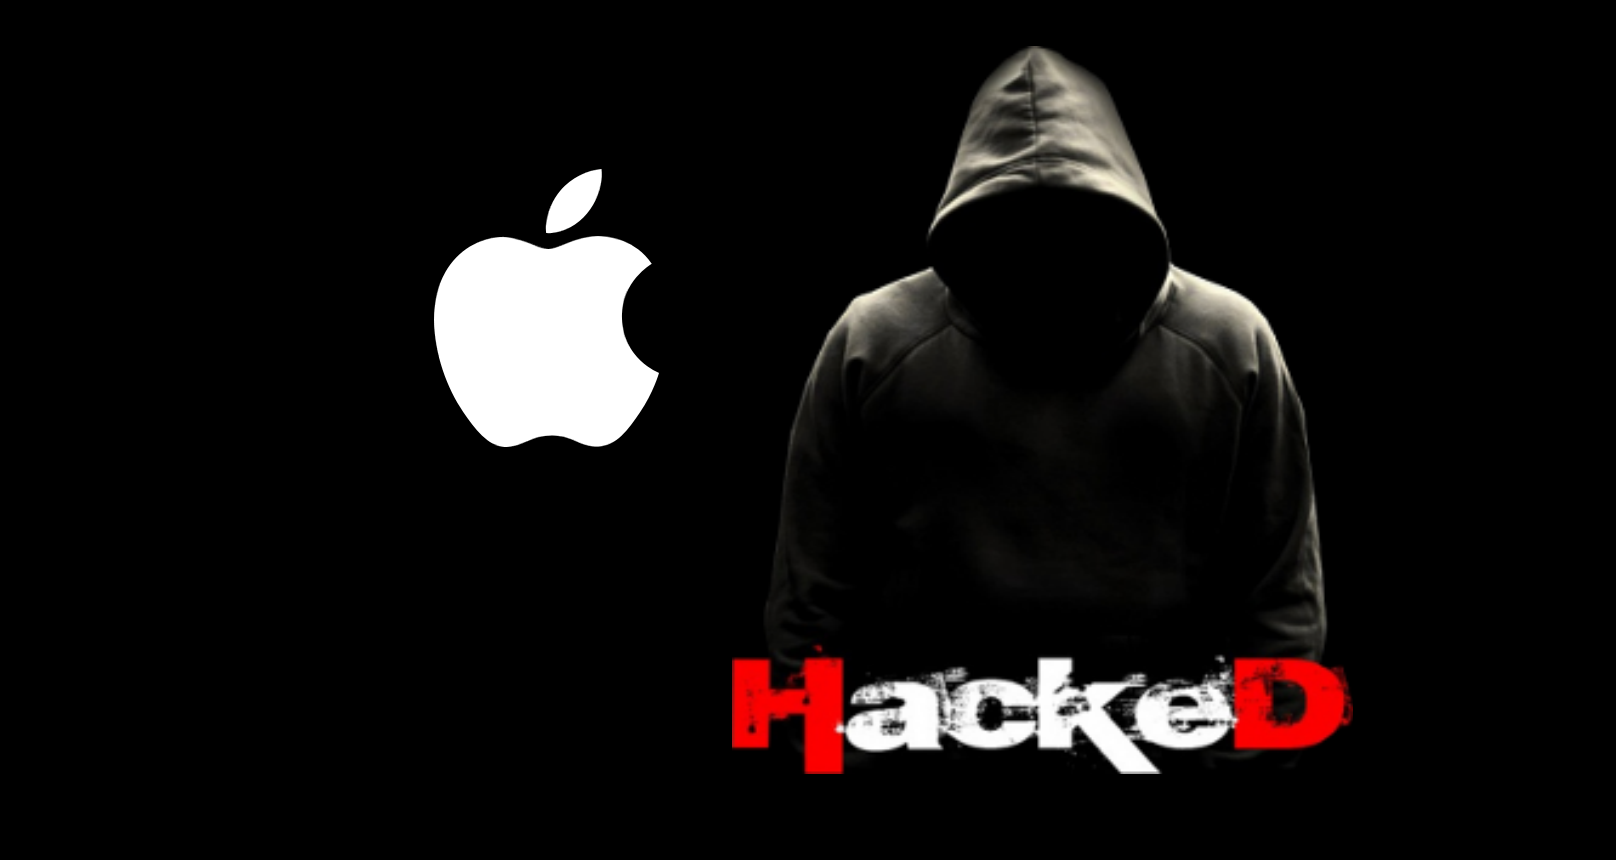 Apple promises $1 million for whoever hacks its iPhone